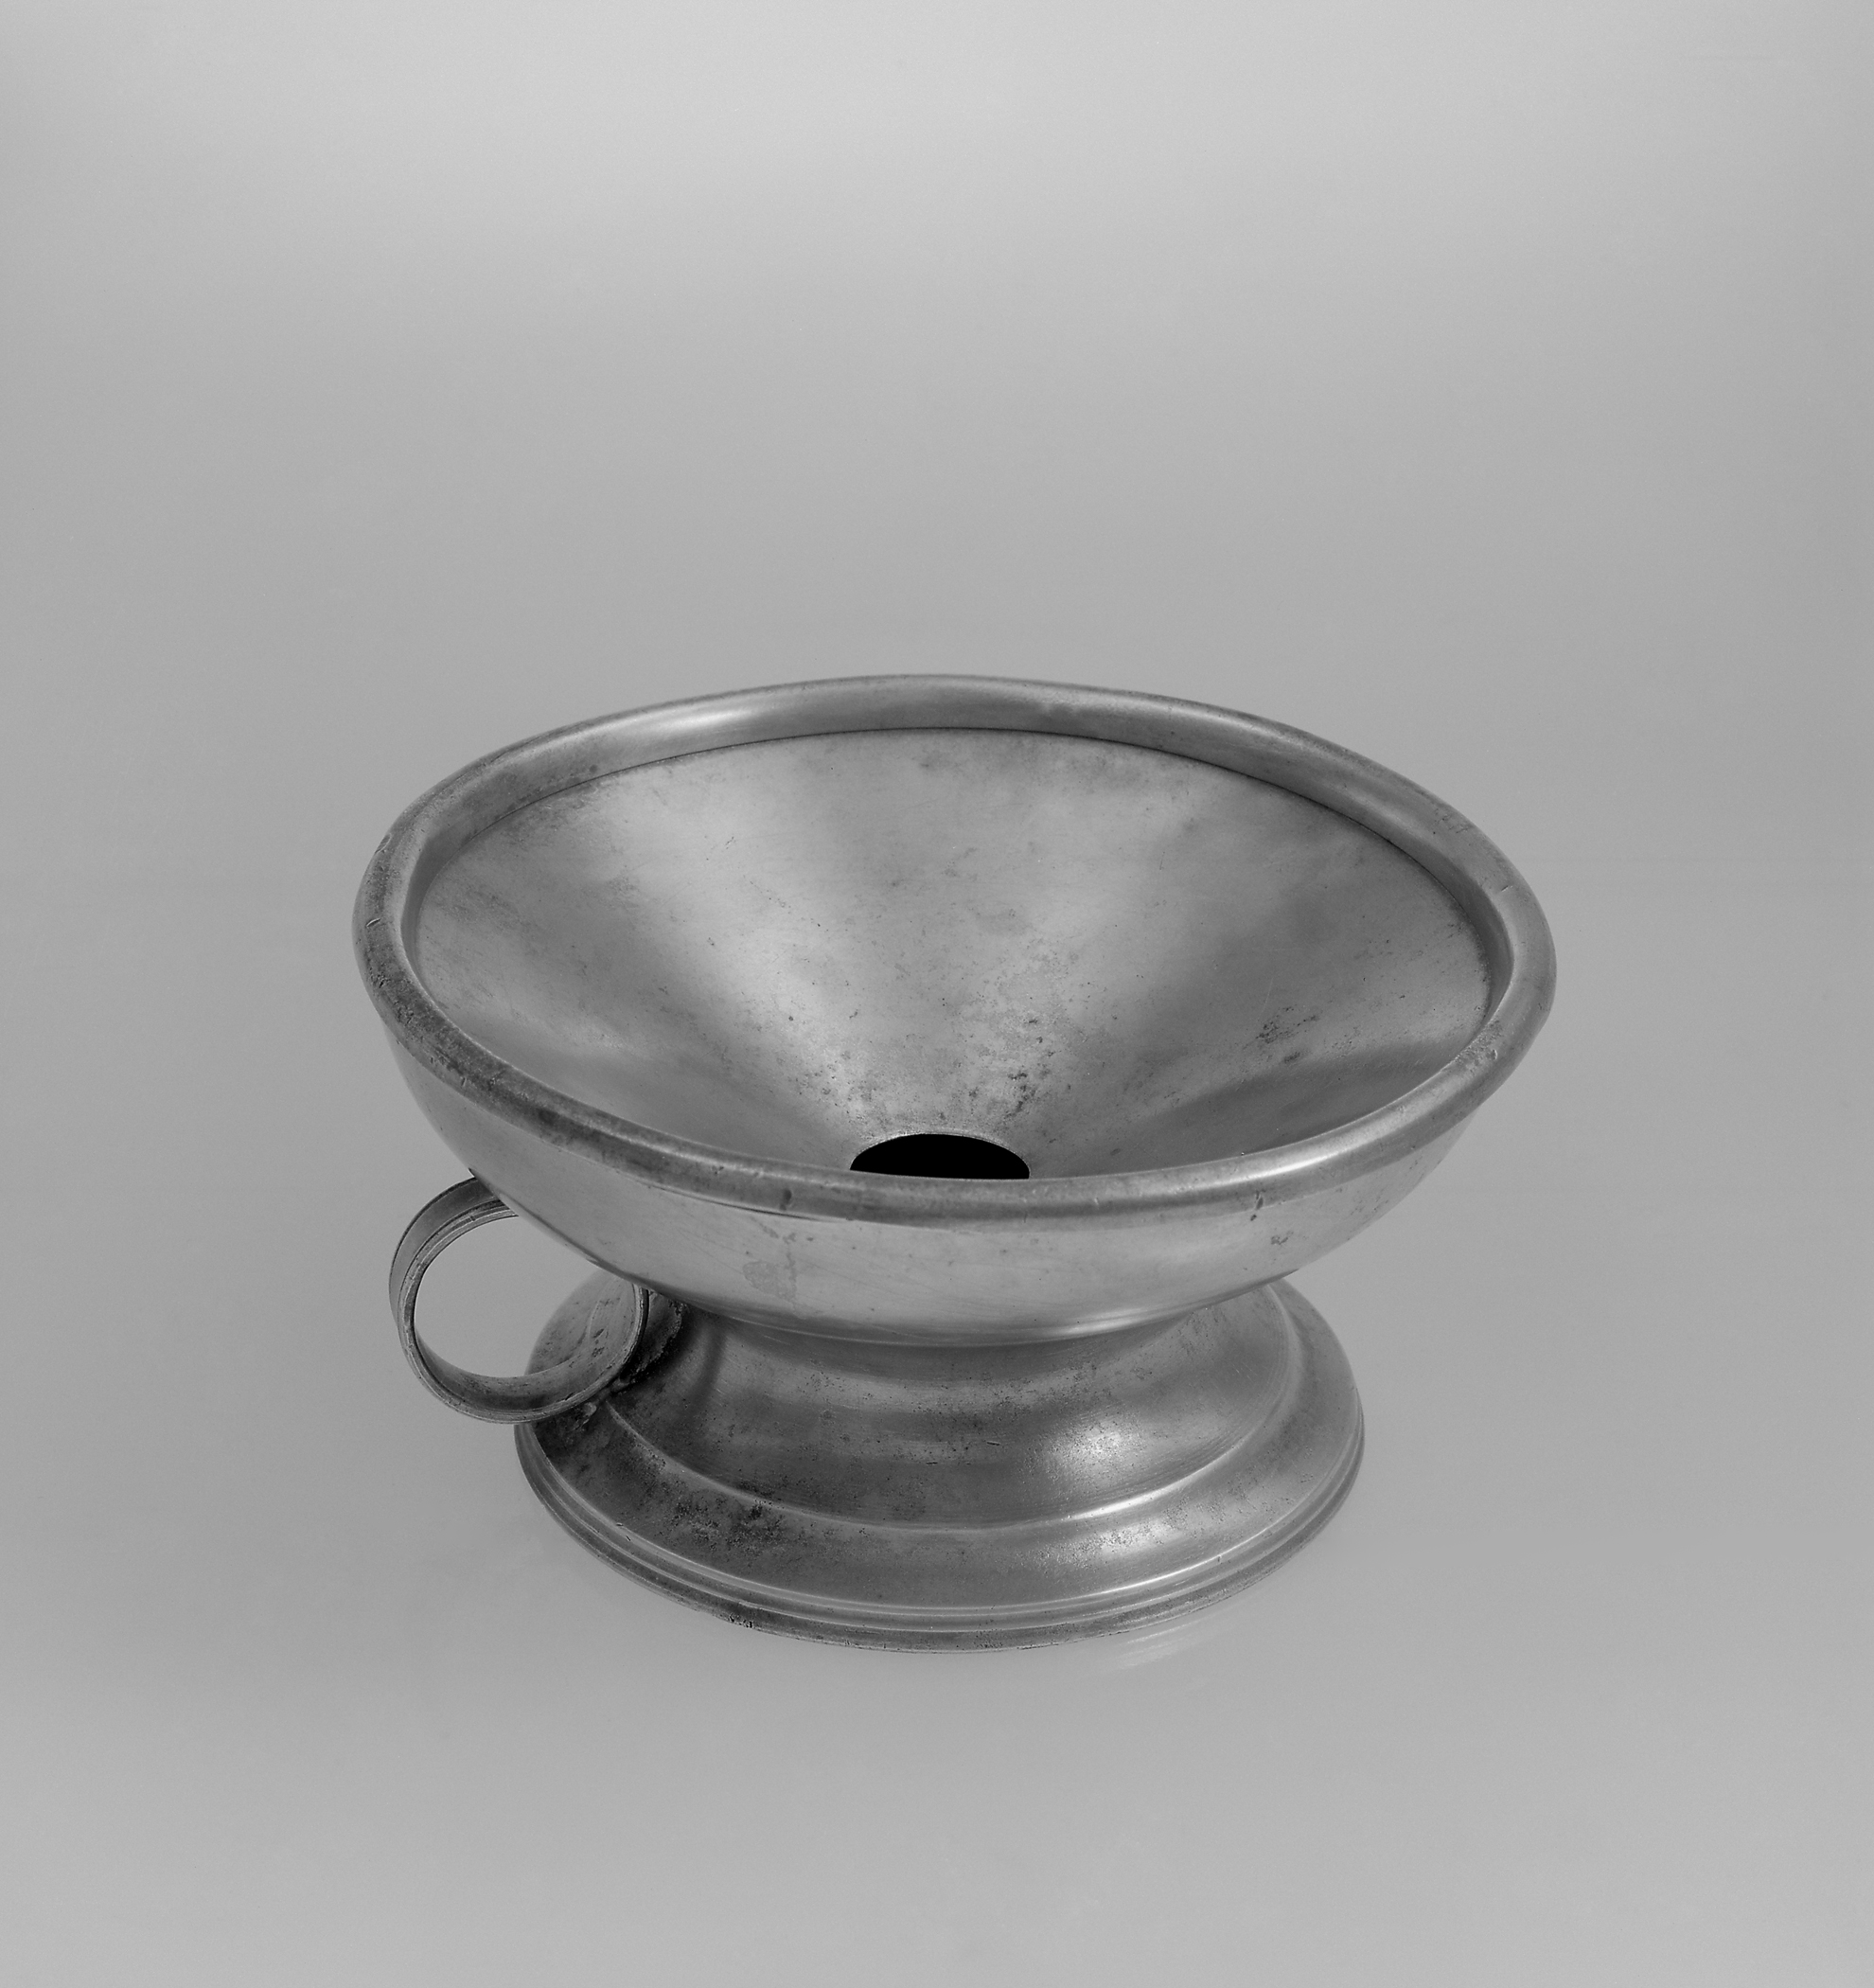 1965.1536 A, B Pewter spittoon